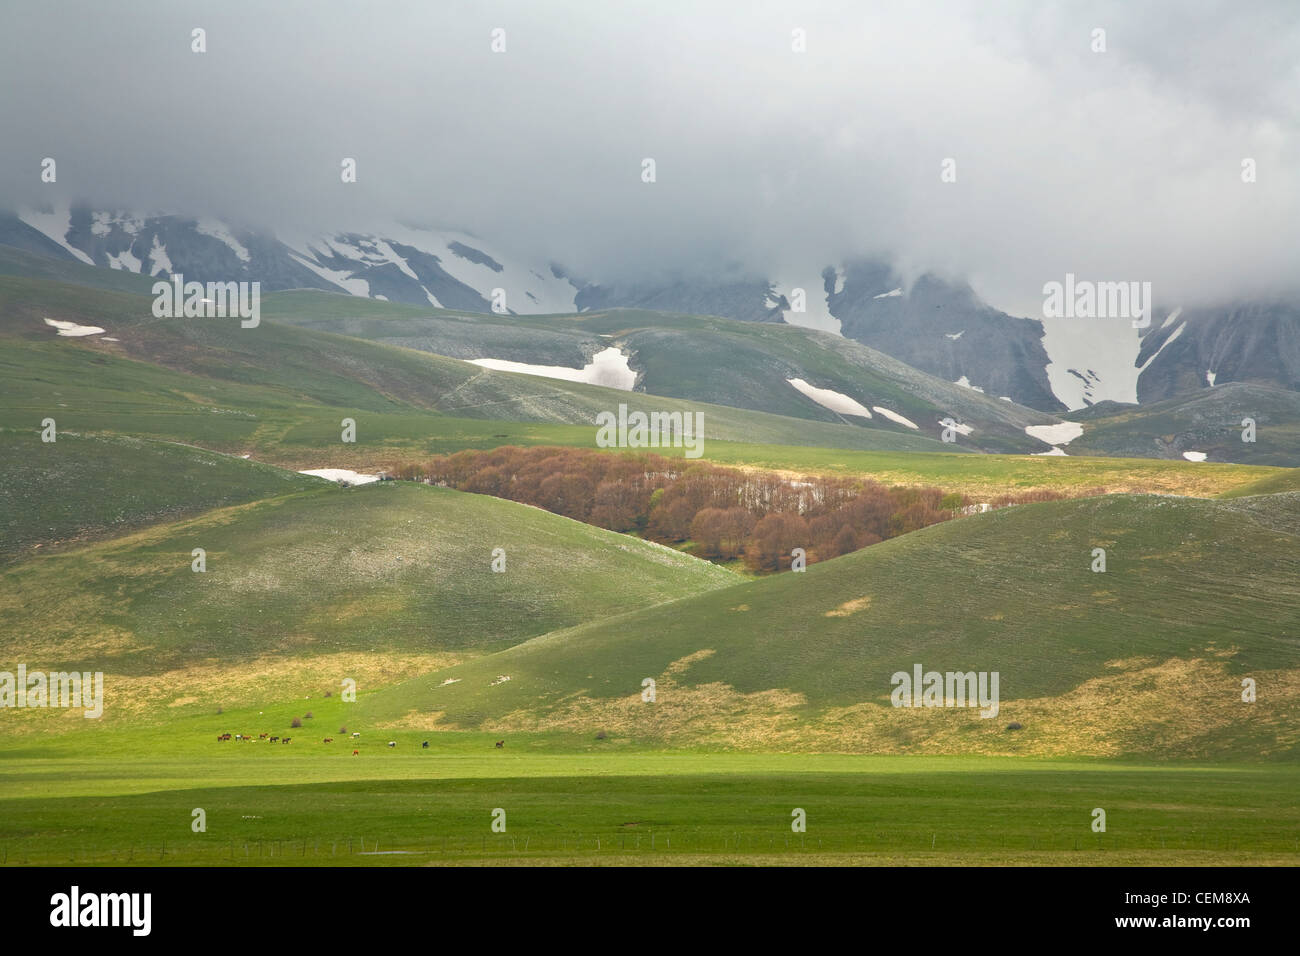 Snowy mountainsides and green meadows with horses, Pian Grande near Castelluccio, Monti Sibillini National Park, Umbria, Italy Stock Photo